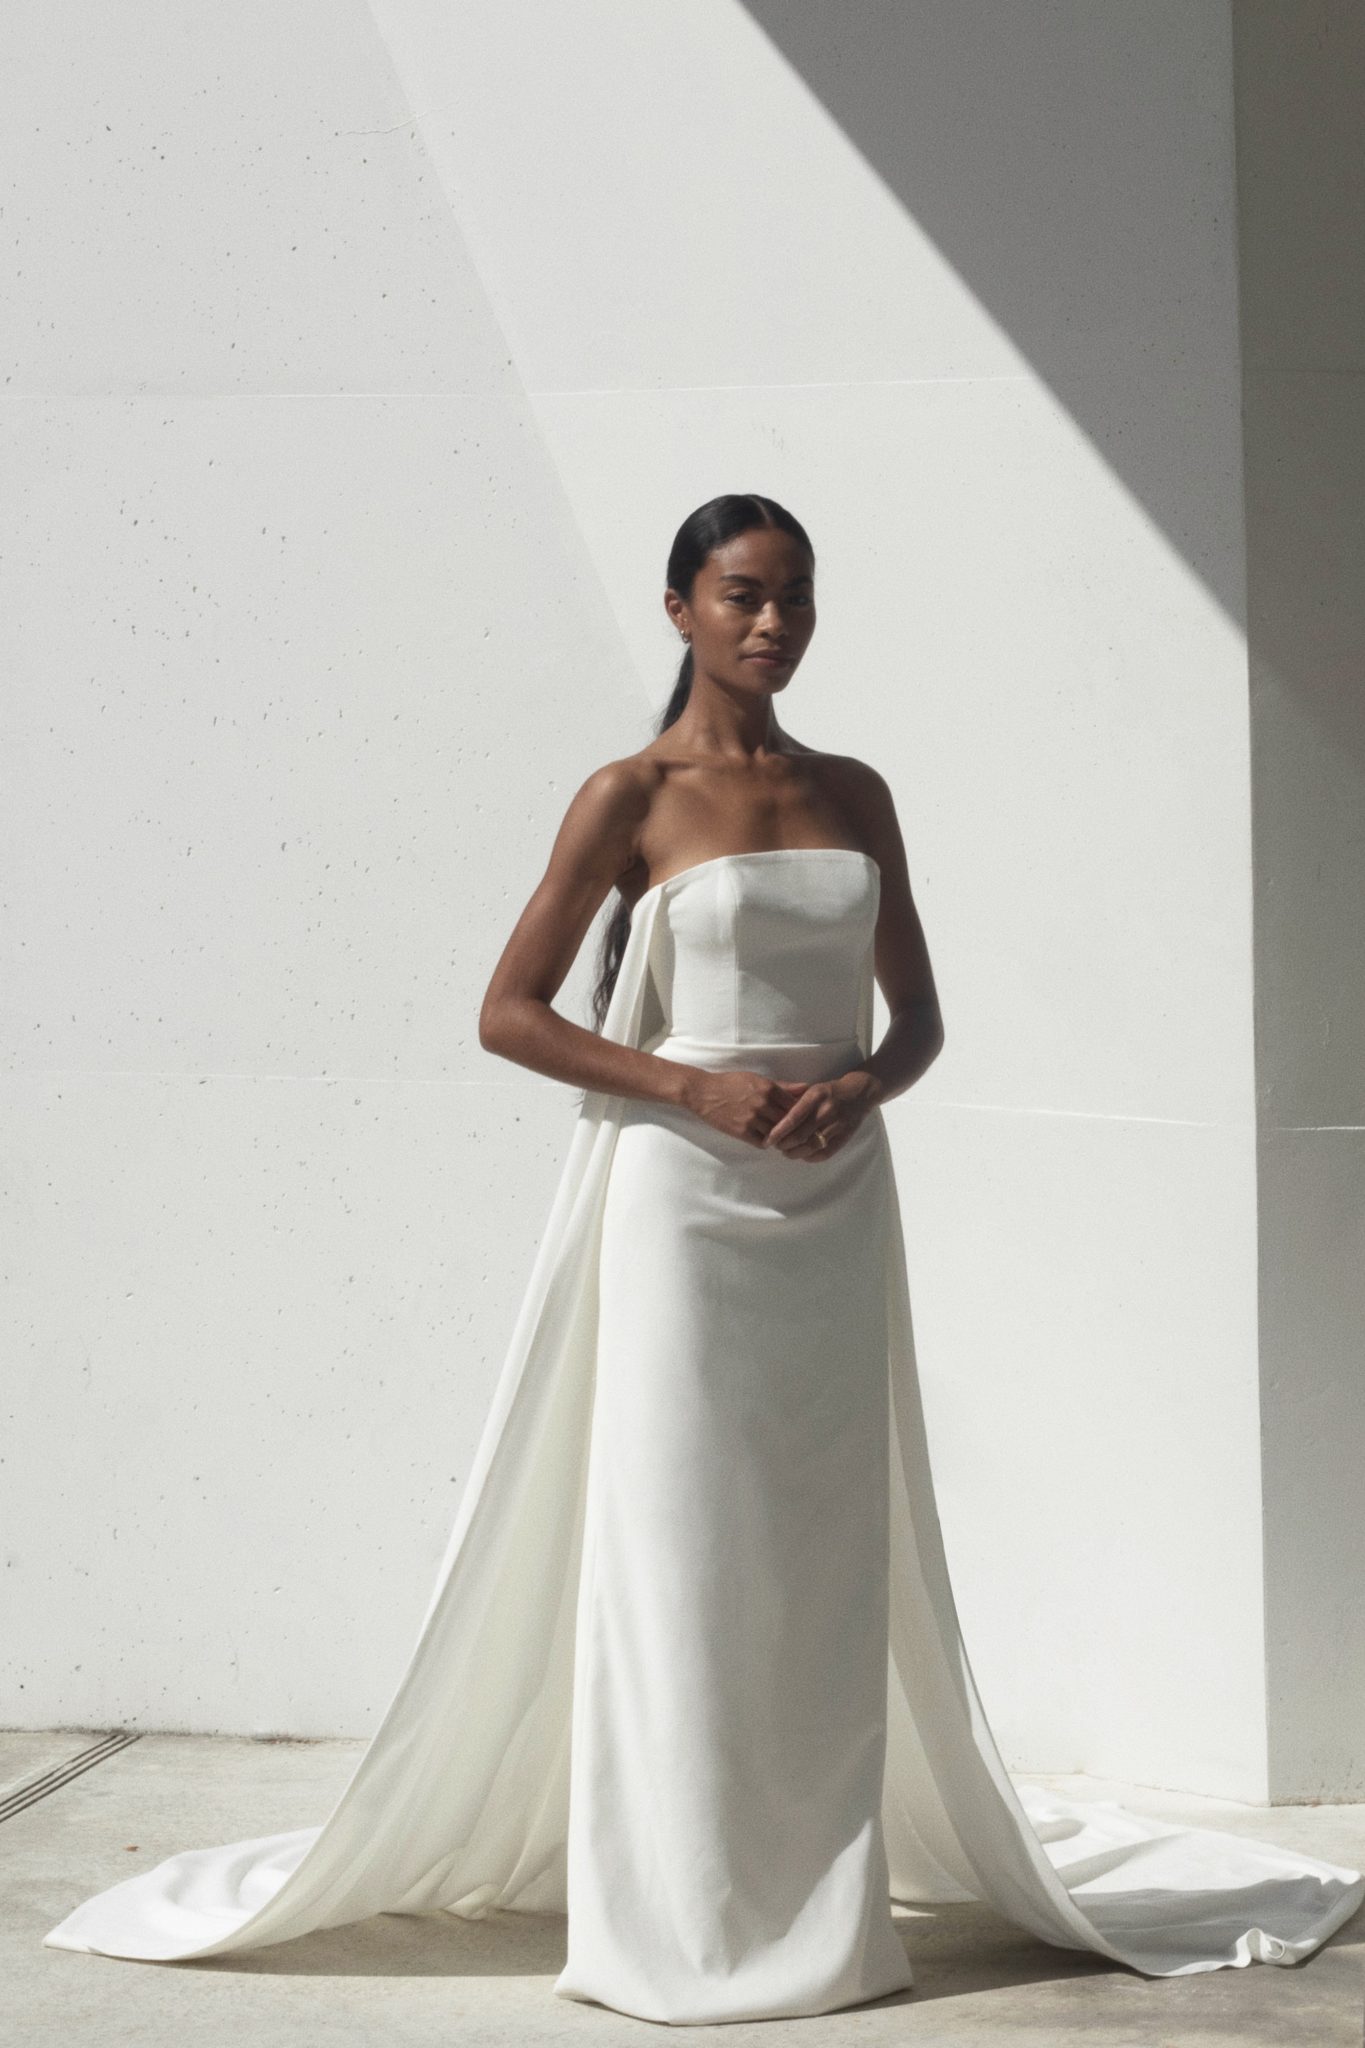 Chic bridal silhouette from Aesling's 2022 wedding dress collection